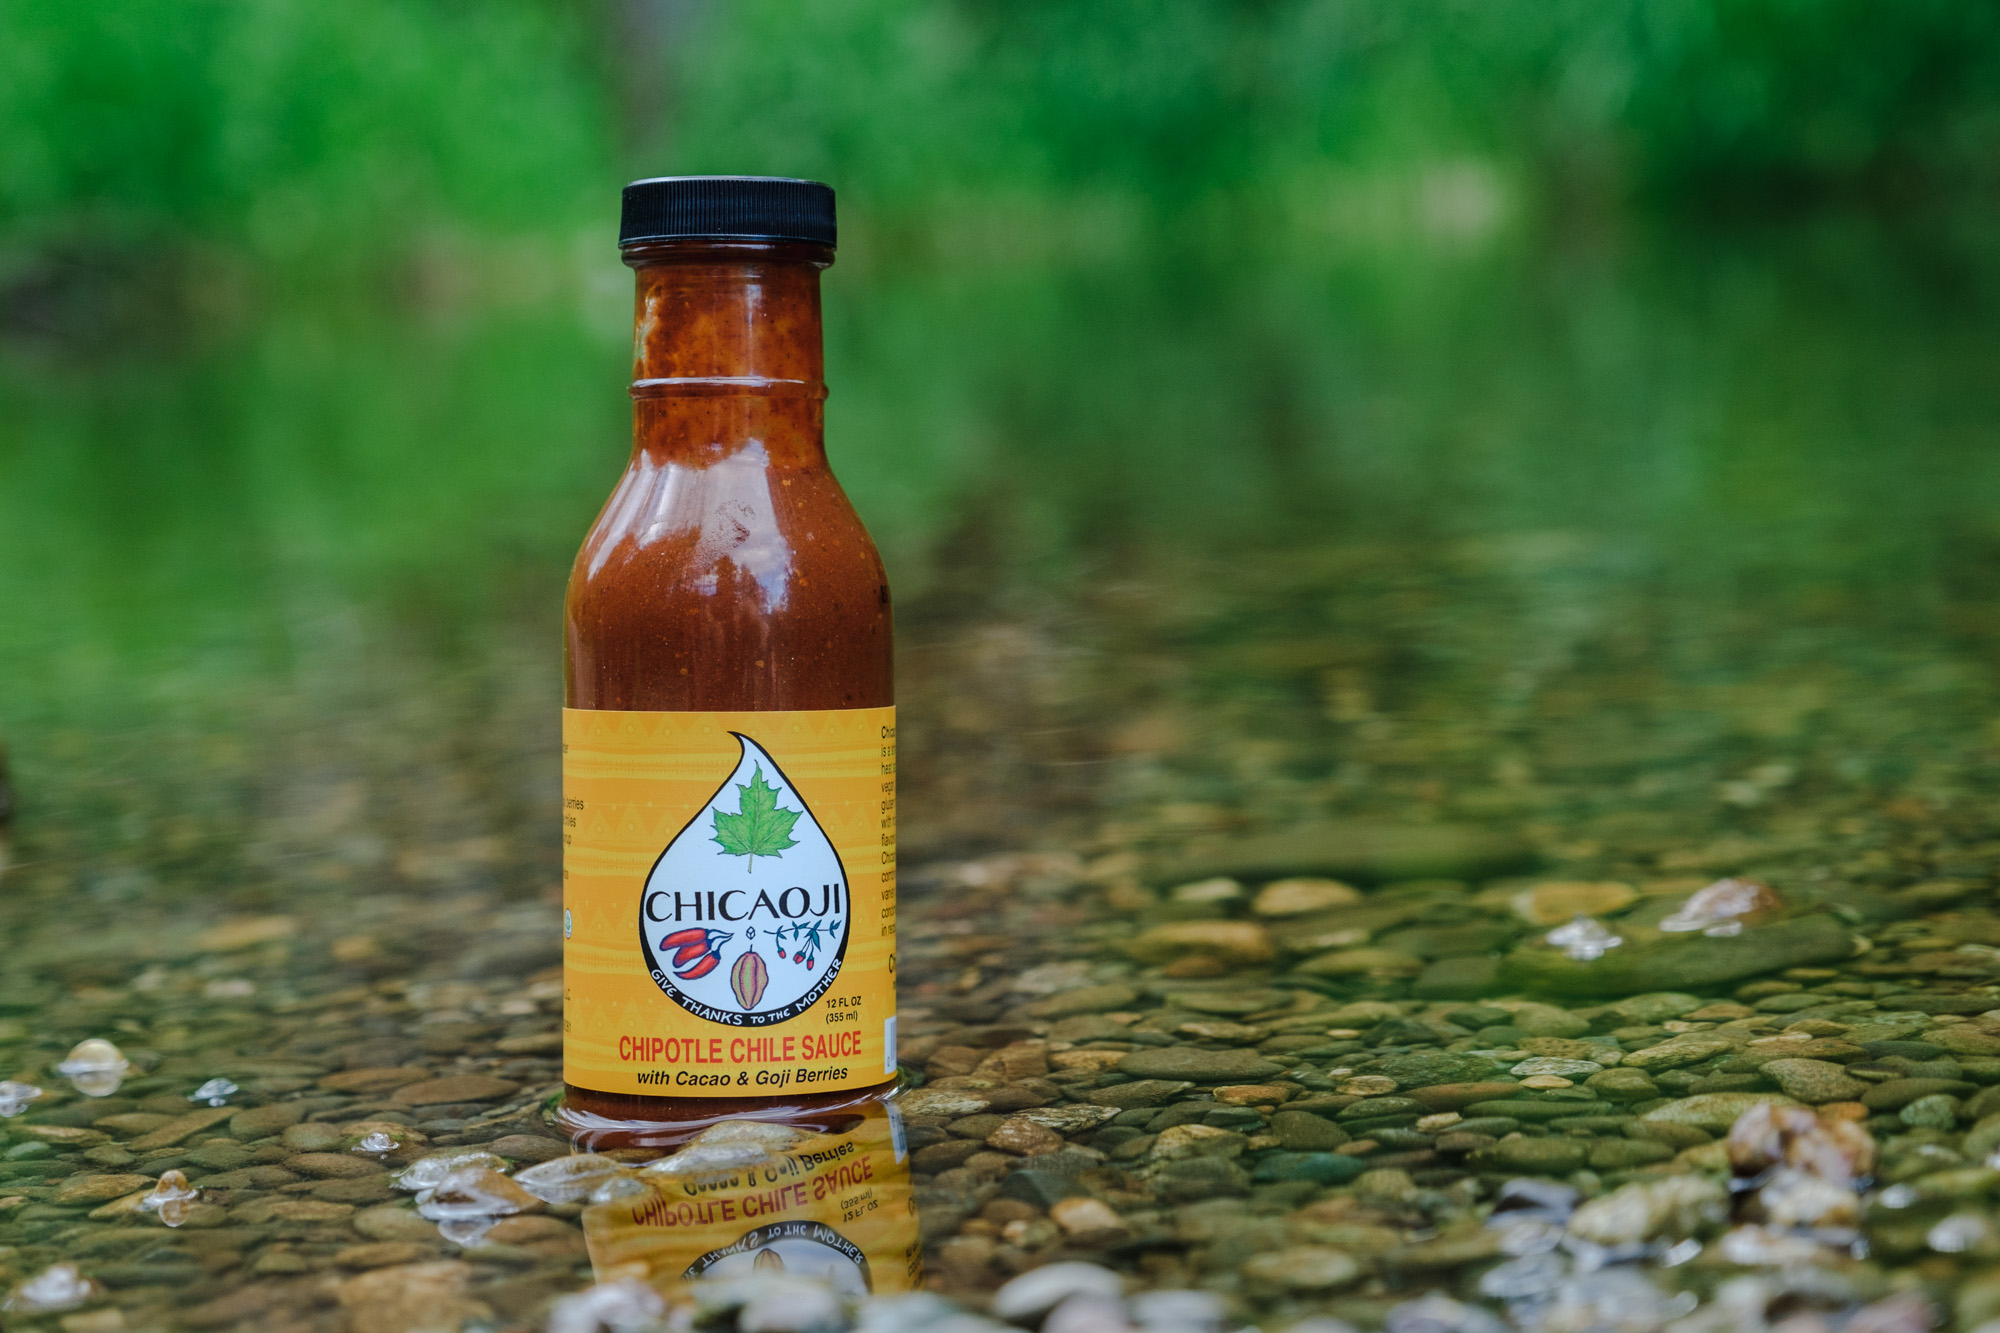 A bottle of Chicaoji sauce sitting on gravel a shallow river